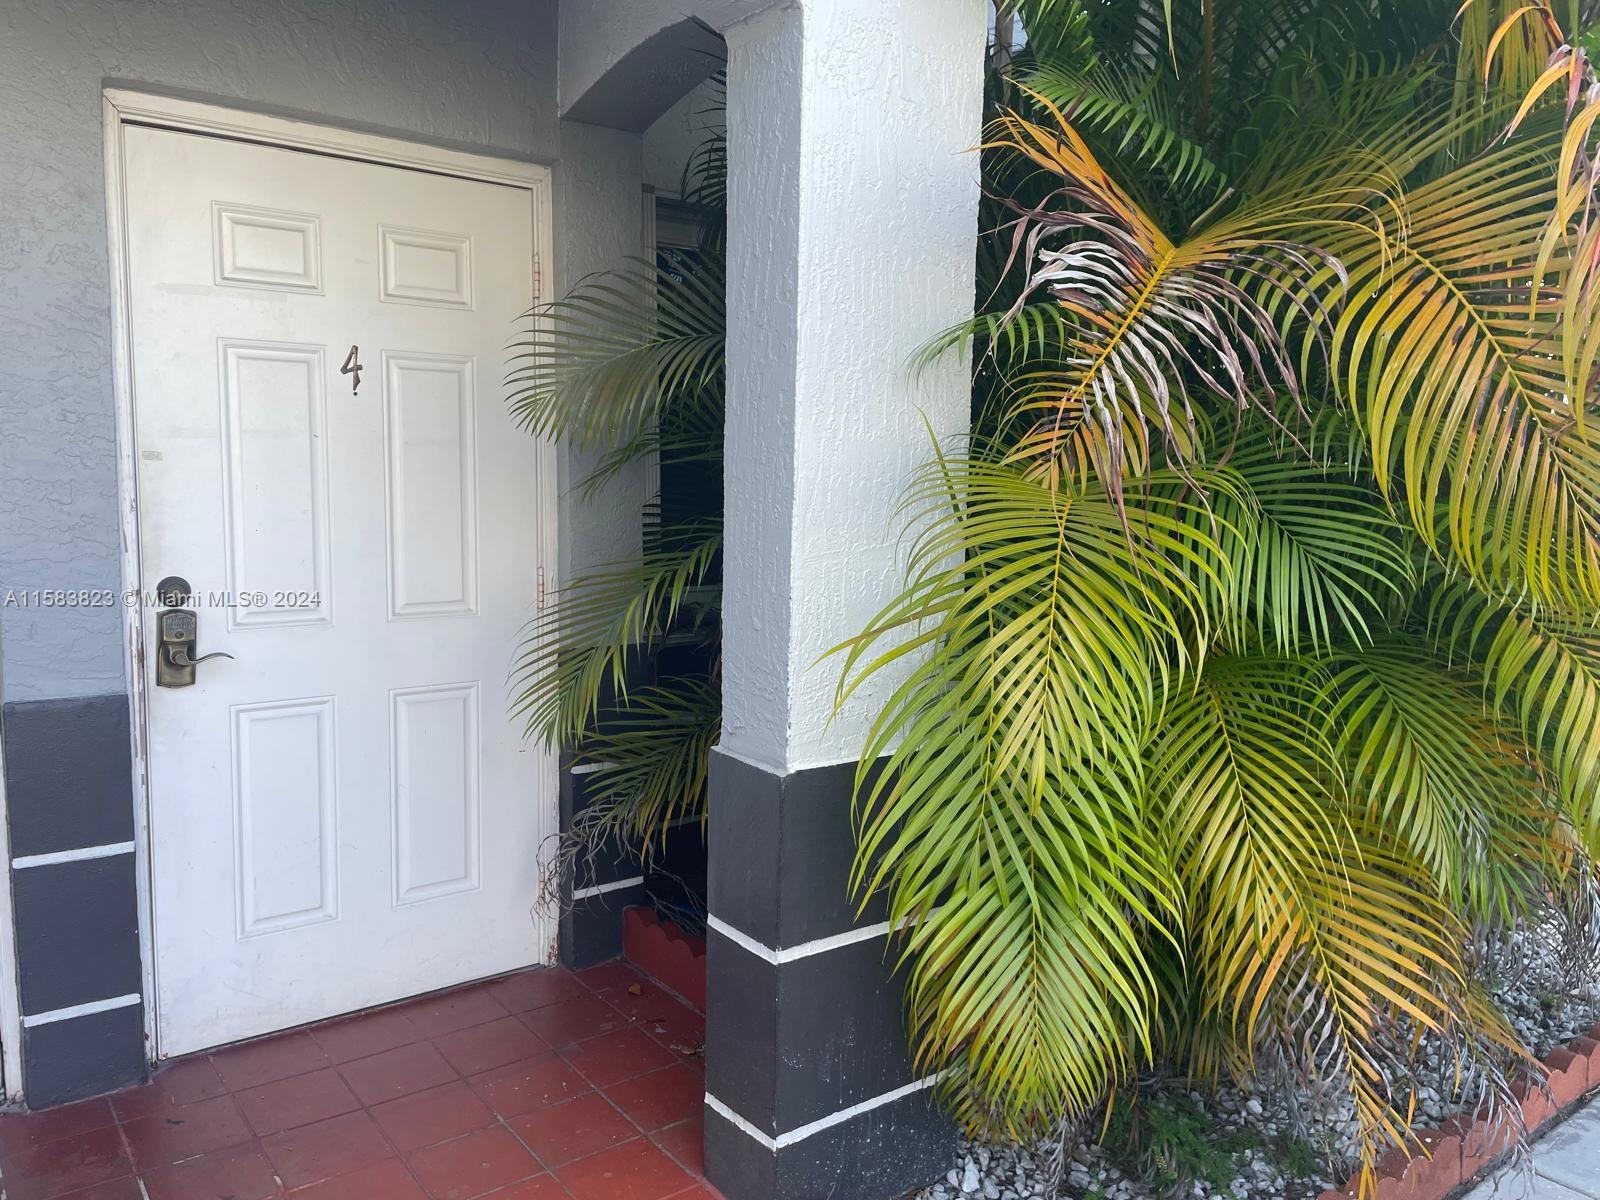 a view of a palm plant that is in front of a house